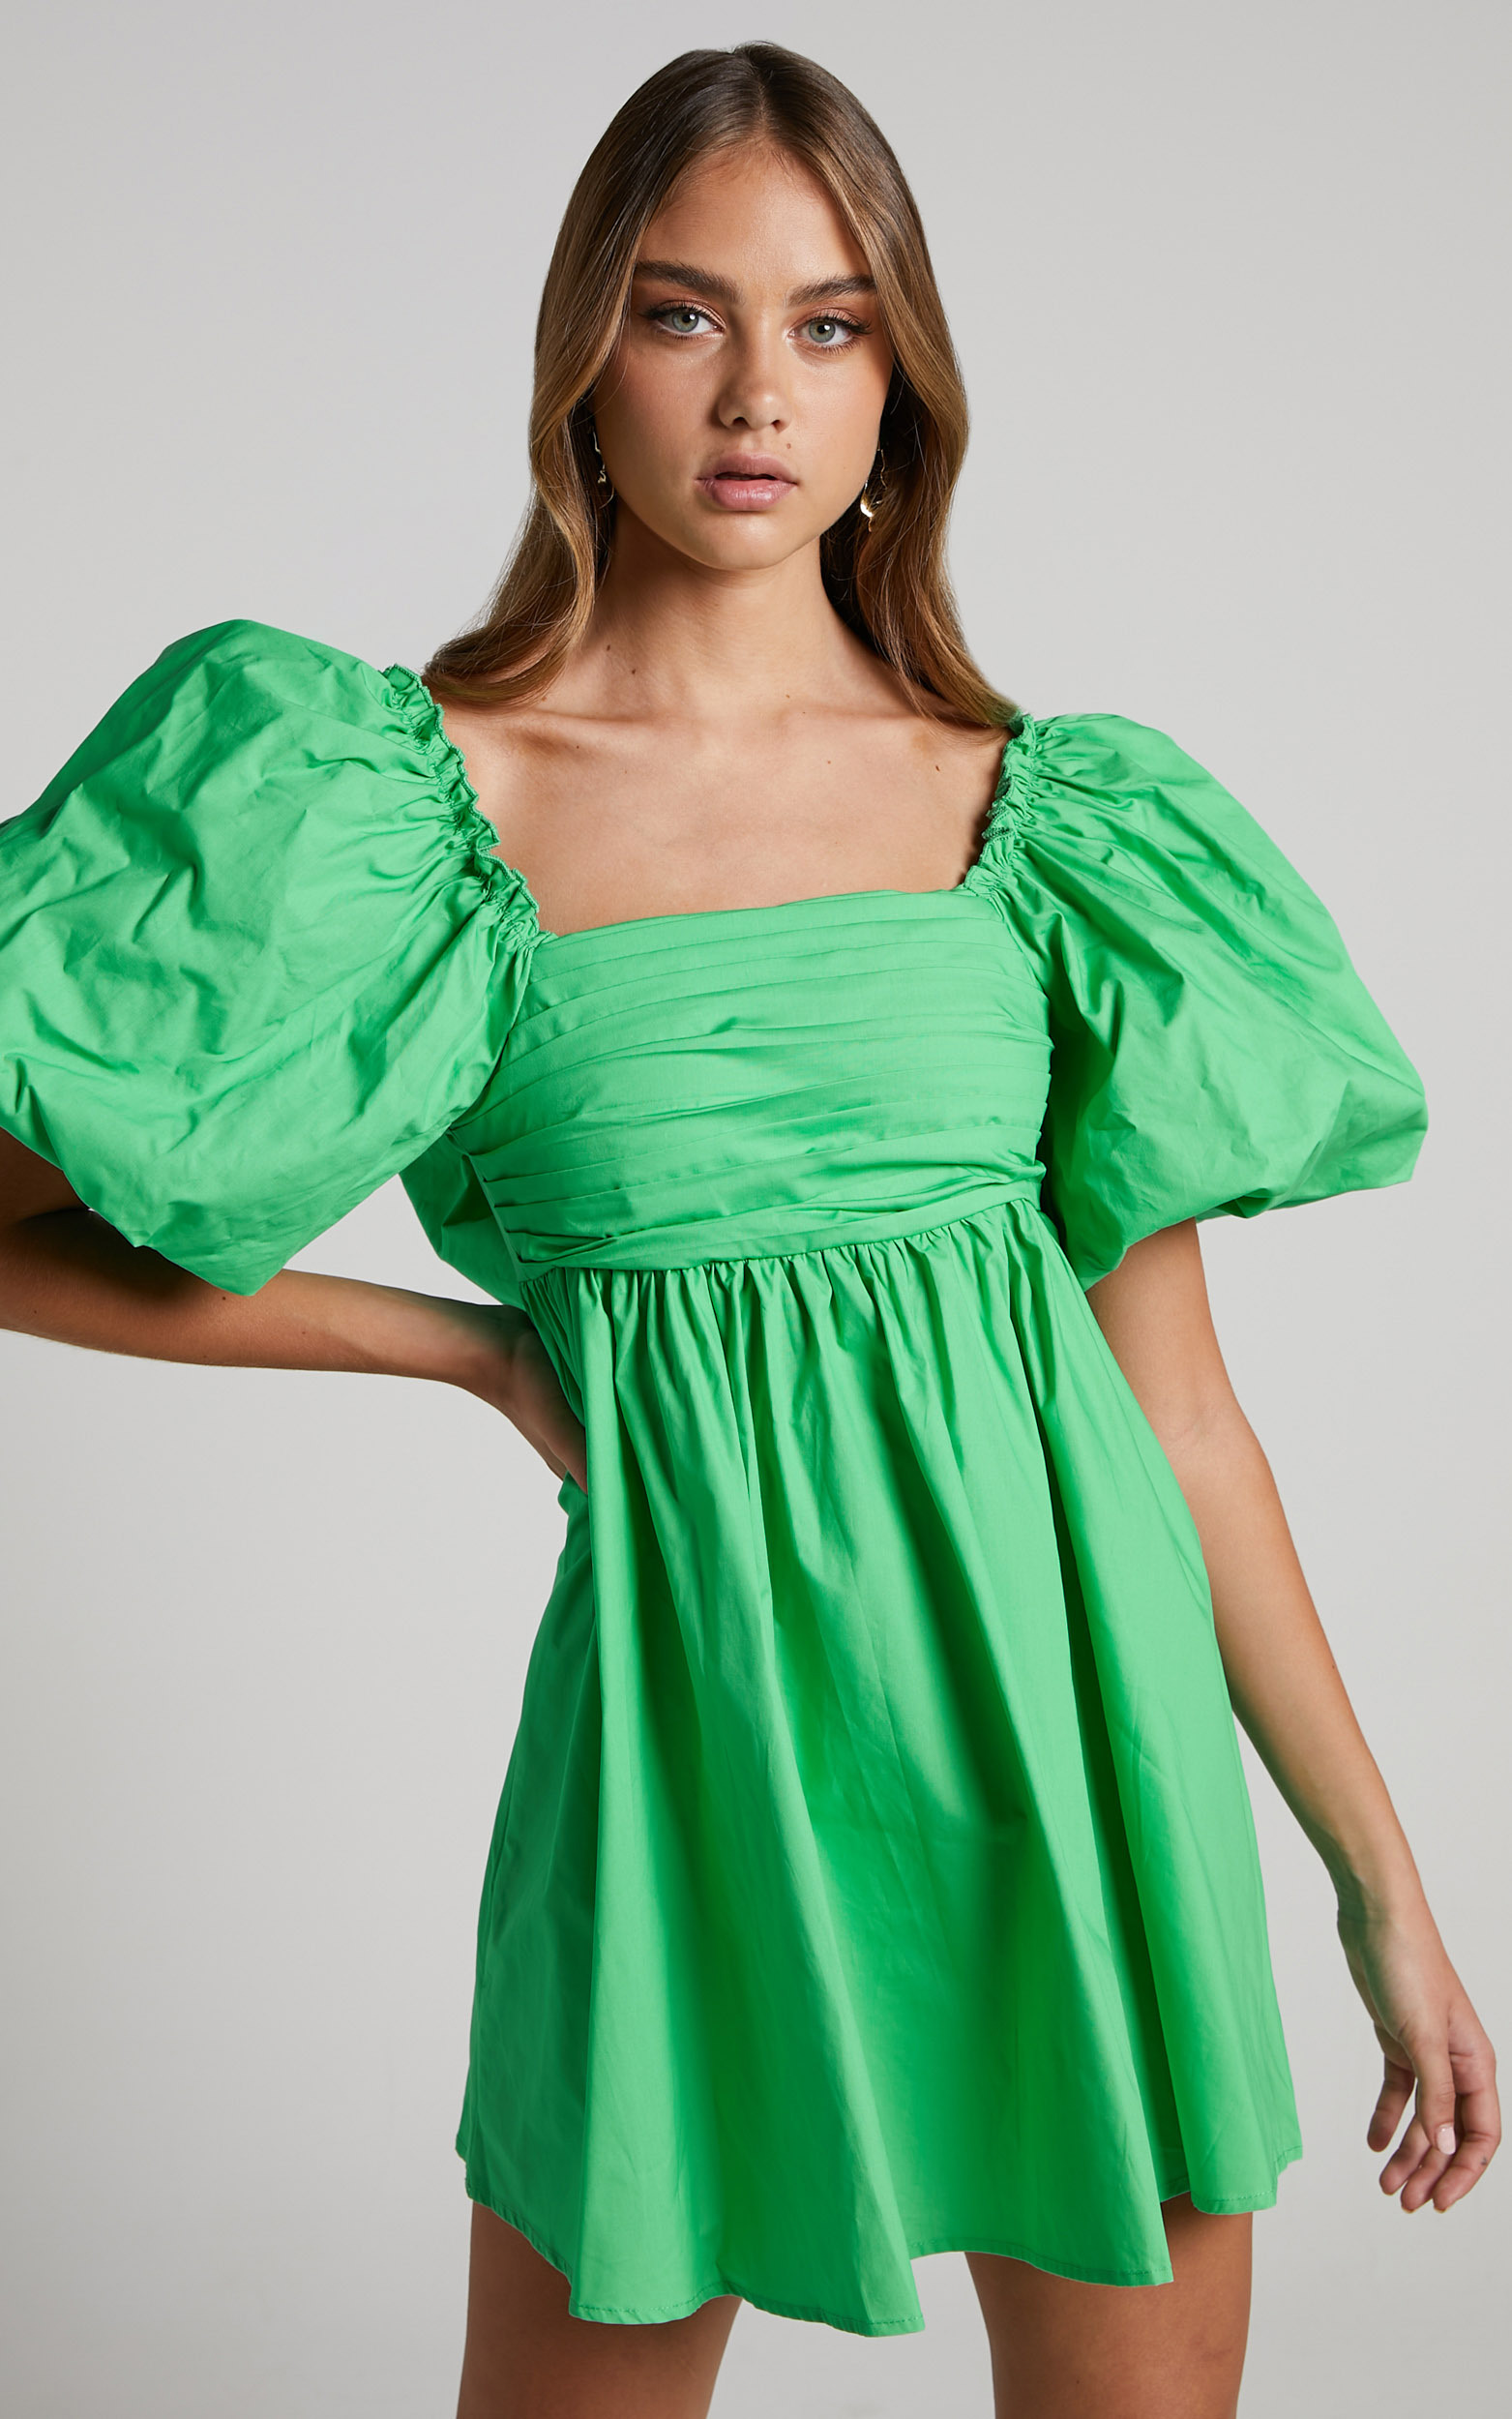 Melony Mini Dress - Cotton Poplin Puff Sleeve Dress in Green - 06, GRN2, hi-res image number null